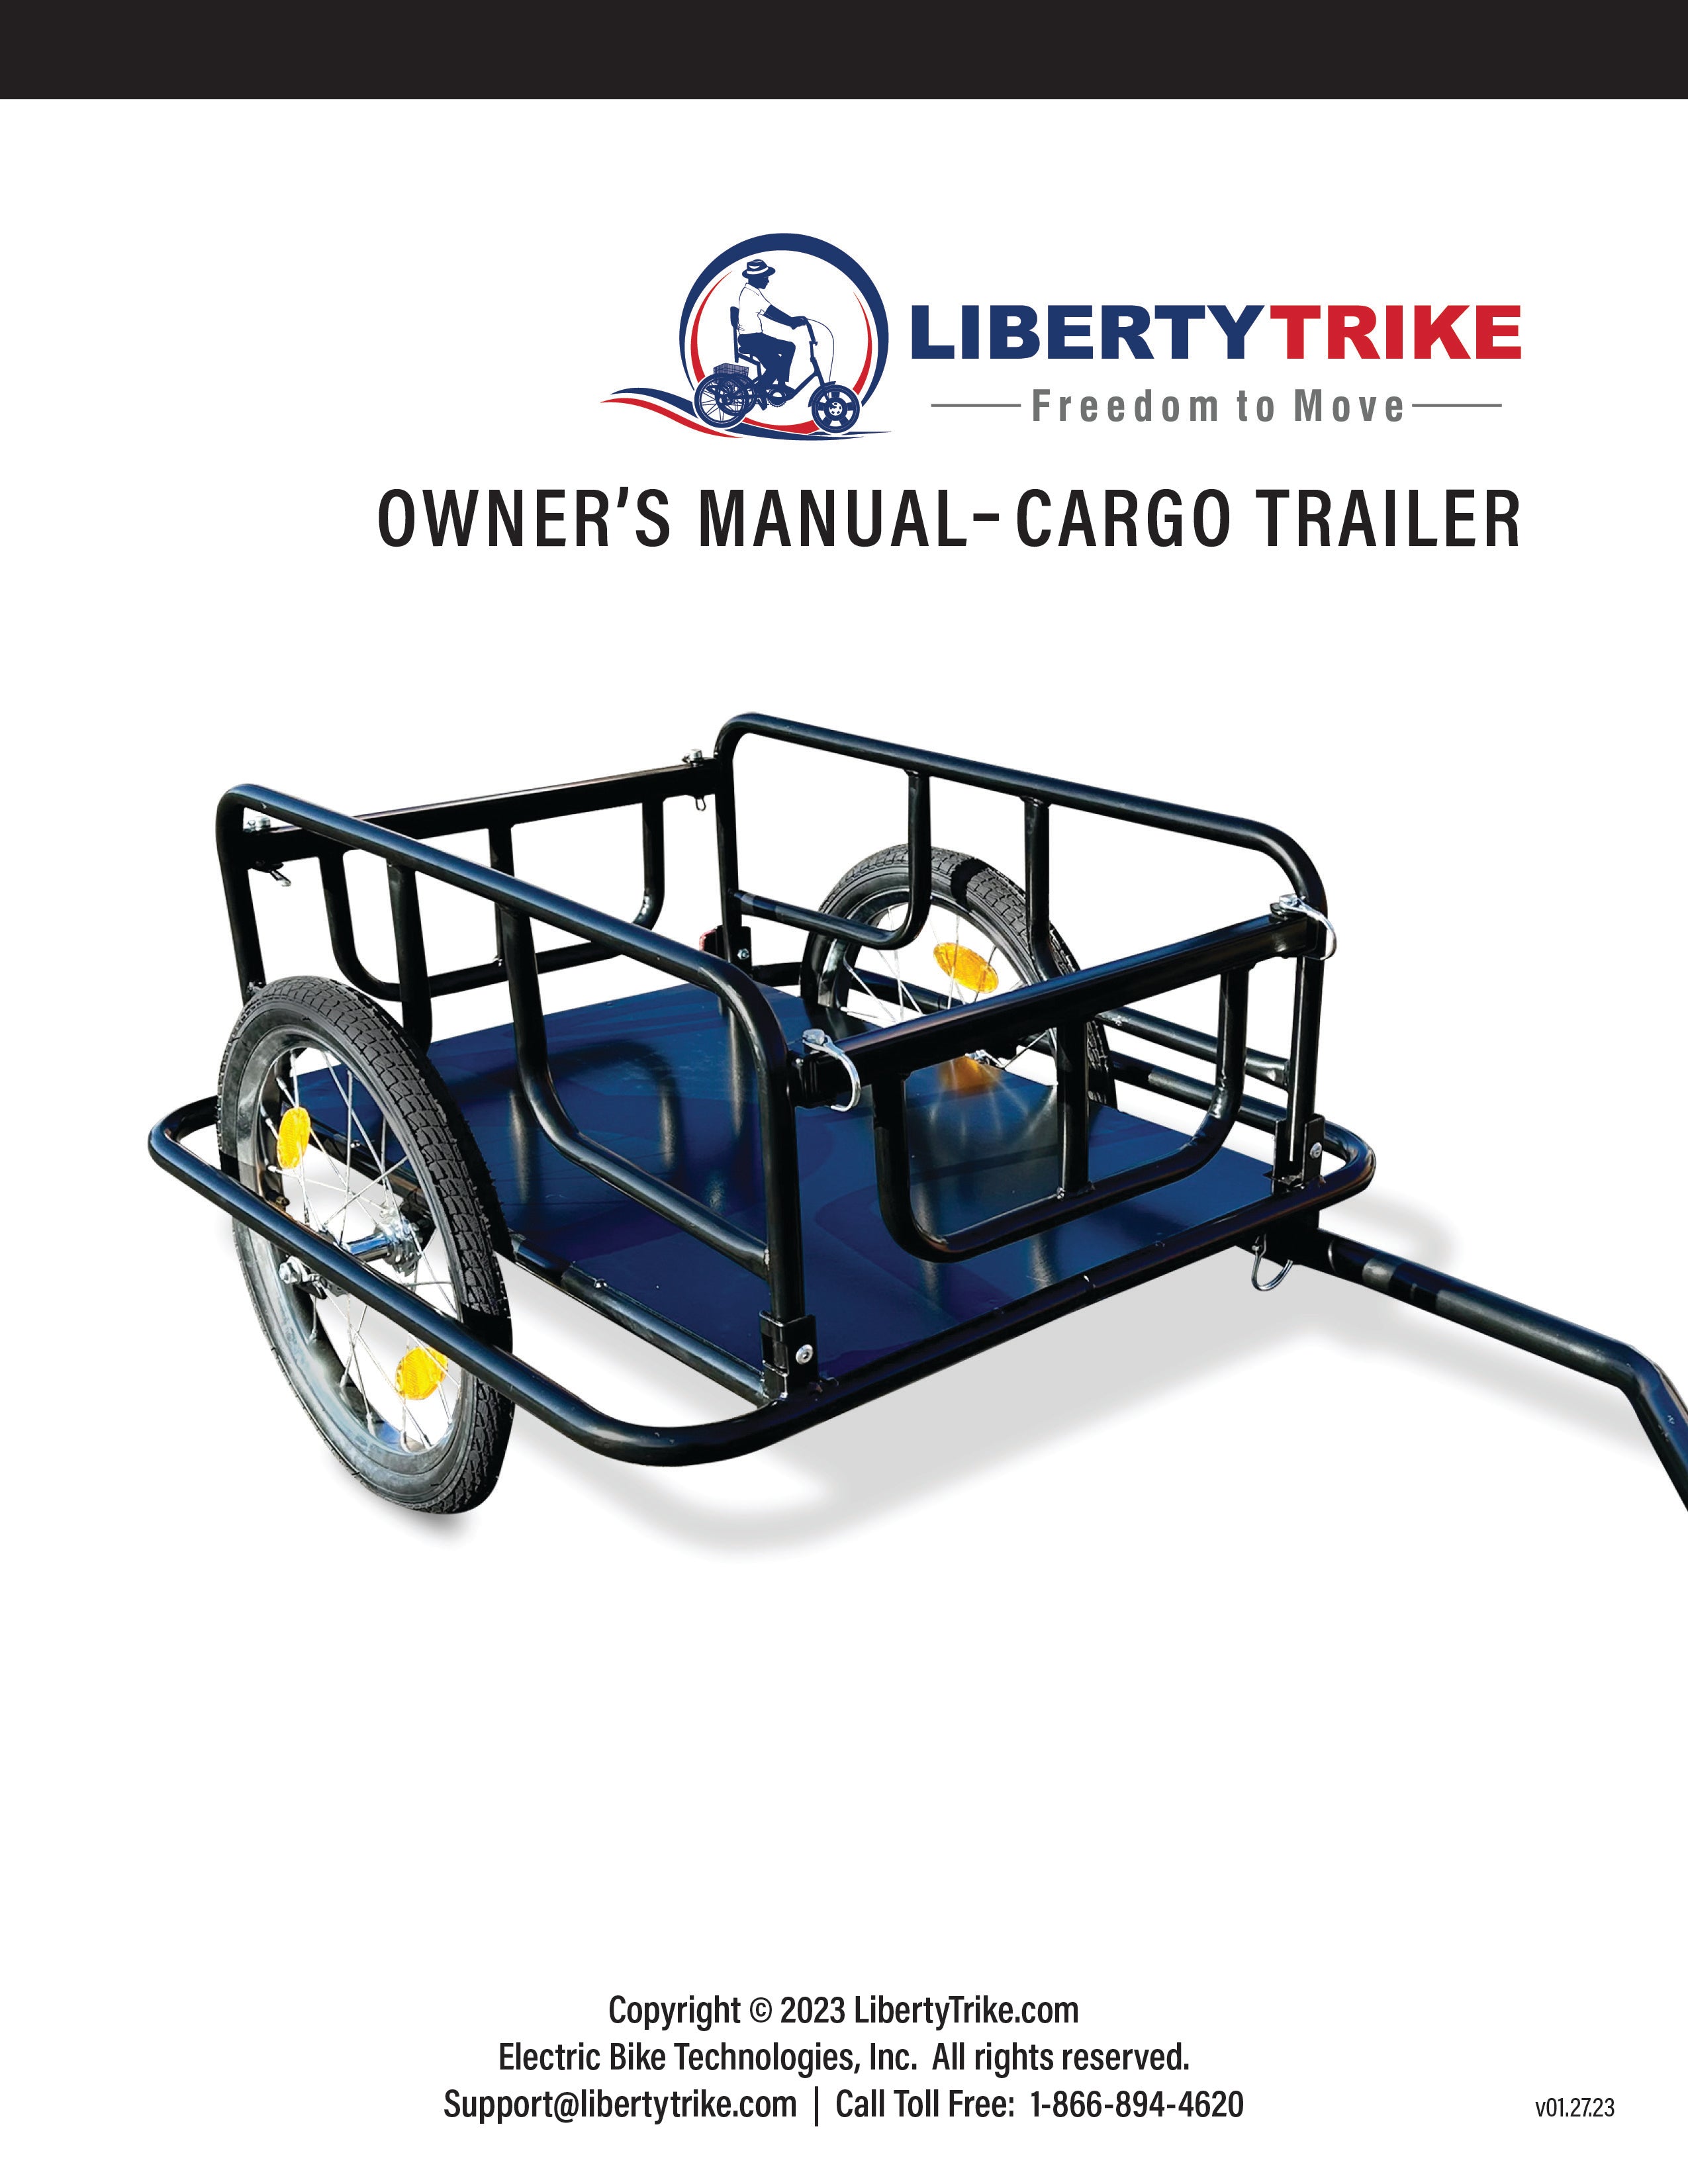 Read and learn how to assemble, connect and fold the Liberty Trike Cargo Trailer.